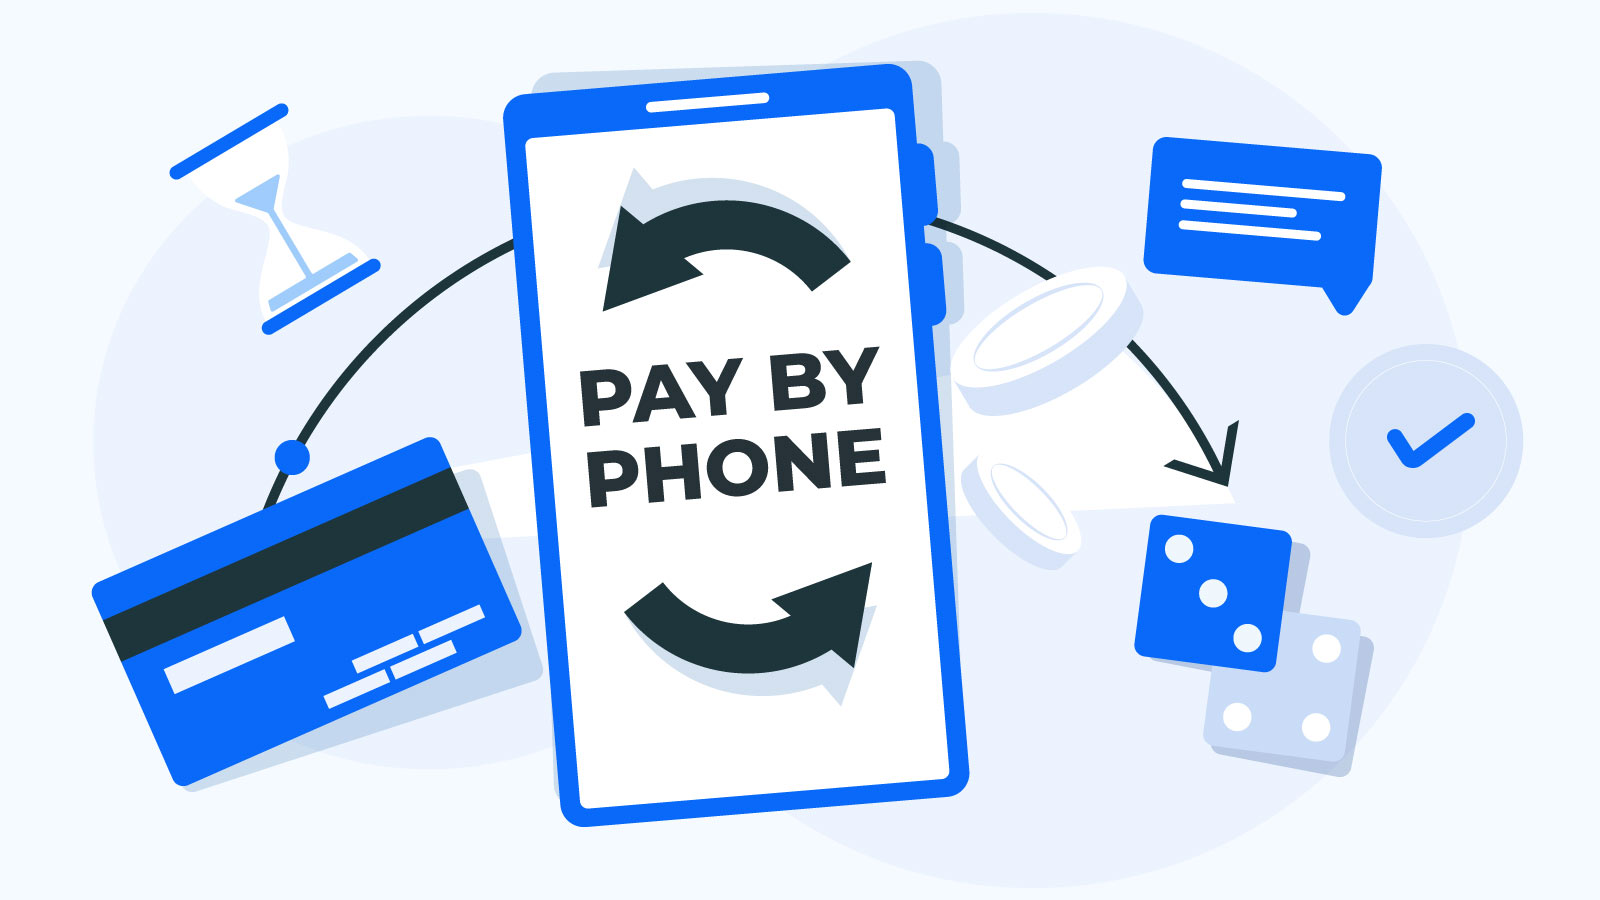 How to Deposit with Pay by Phone in an Online Casino